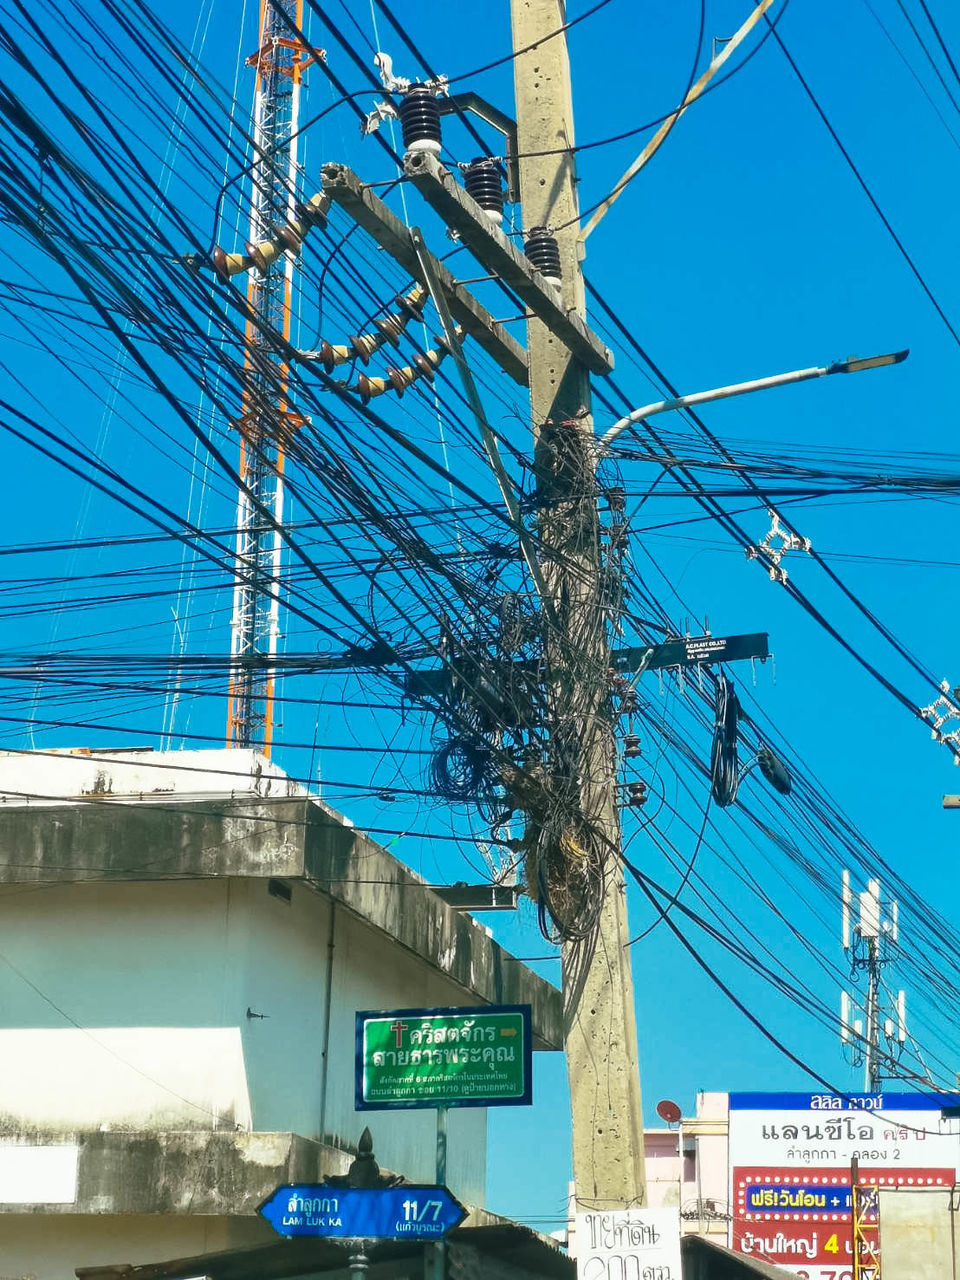 cable, electricity, architecture, power line, sky, transportation, vehicle, blue, built structure, day, nature, communication, mode of transportation, electricity pylon, sign, power supply, technology, no people, low angle view, city, building exterior, clear sky, power generation, outdoors, road, overhead power line, mast, street, text, urban area